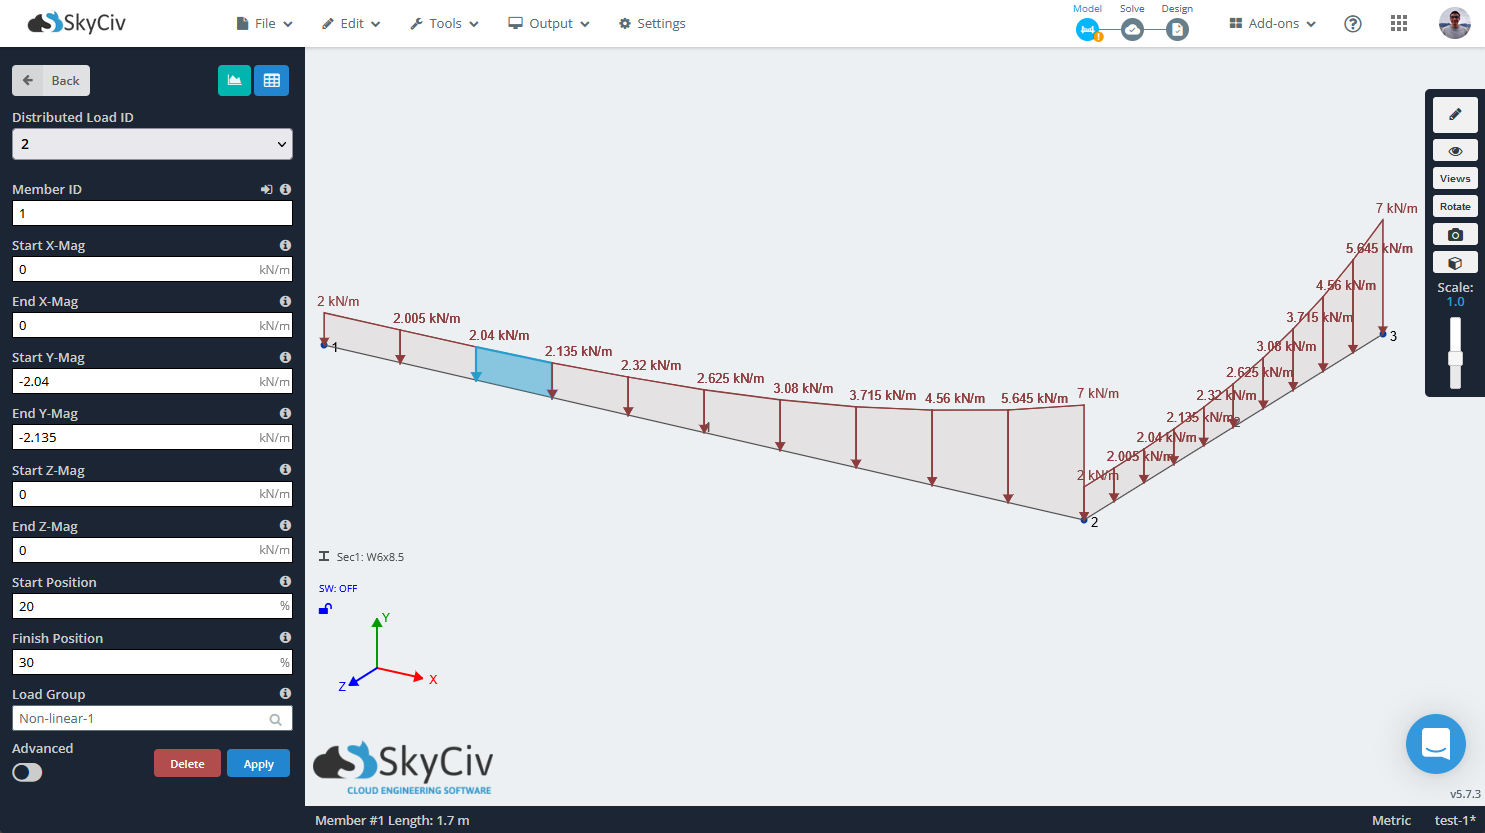 SkyCiv S3D showing a non-linear or equation defined distributed load